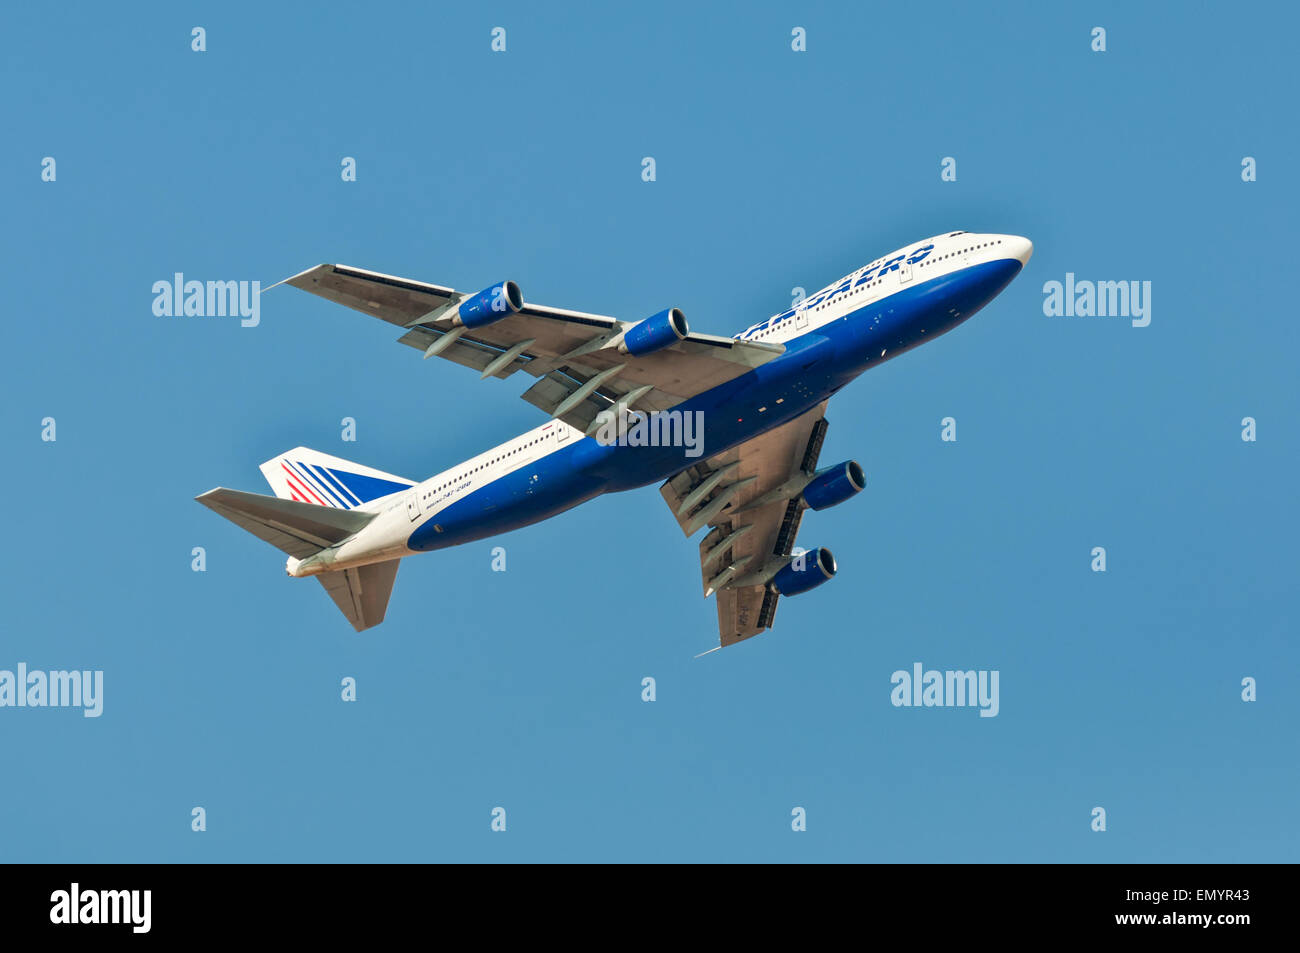 Boeing 747-200 Transaero Airlines climbing after takeoff from the Sharm El Sheikh Stock Photo